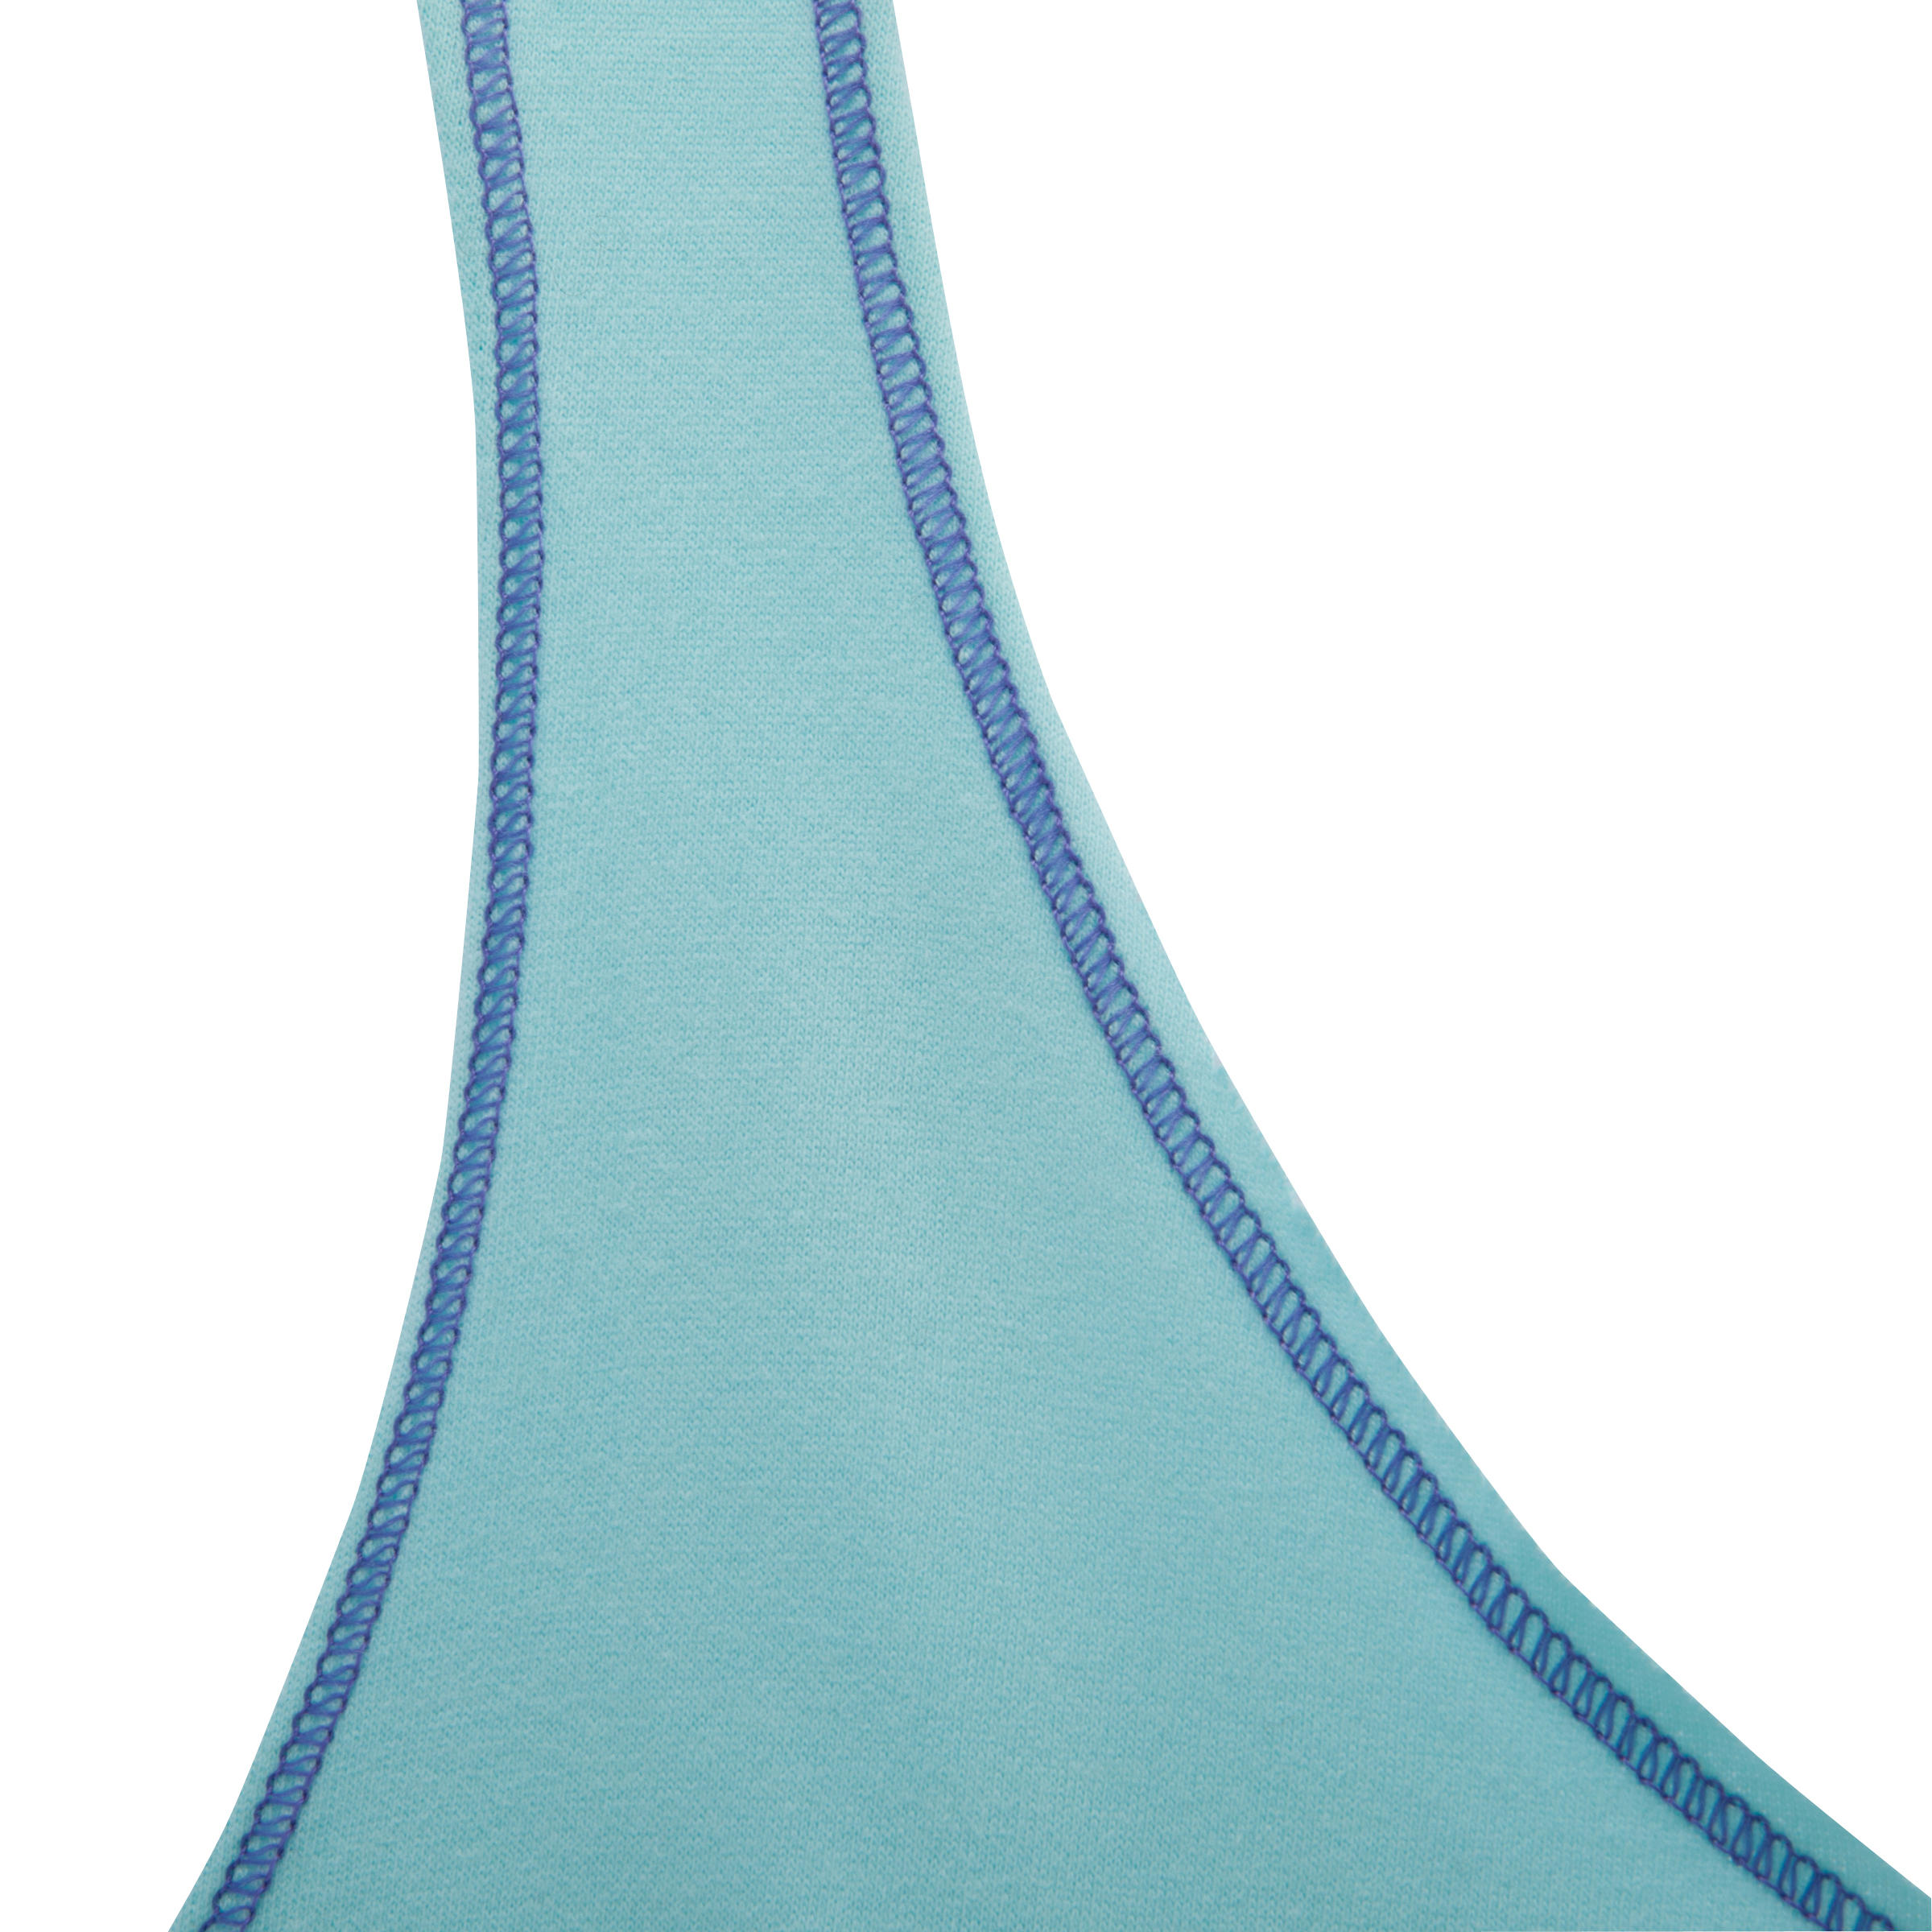 Women's Fitness Tank Top - Turquoise 9/12